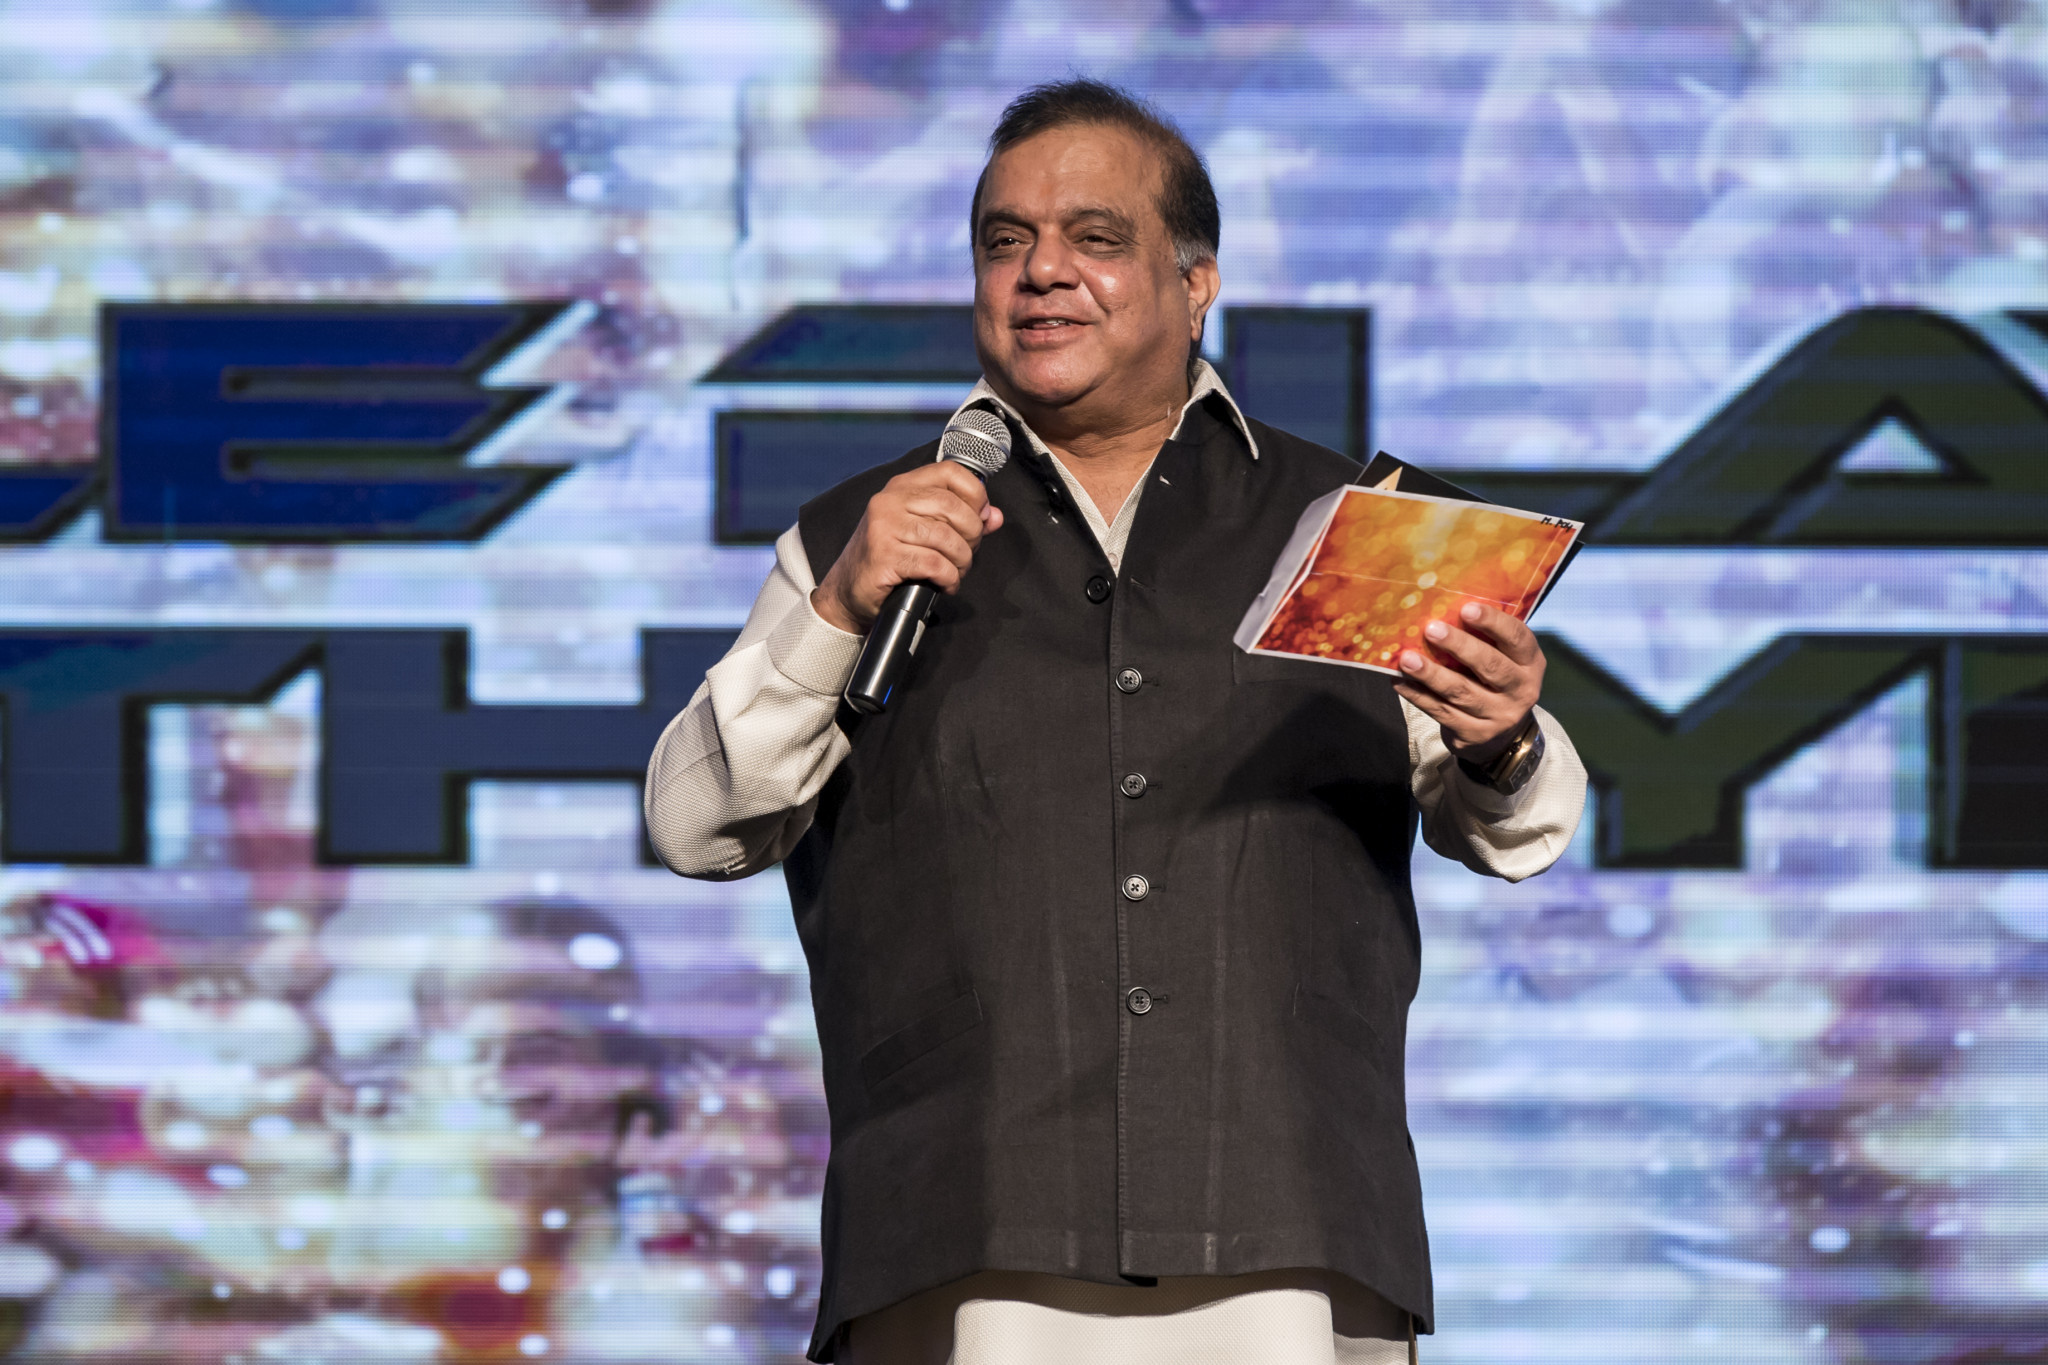 Narinder Batra is hoping to stand against N. Ramachandran and replace him as President of the IOA ©Getty Images